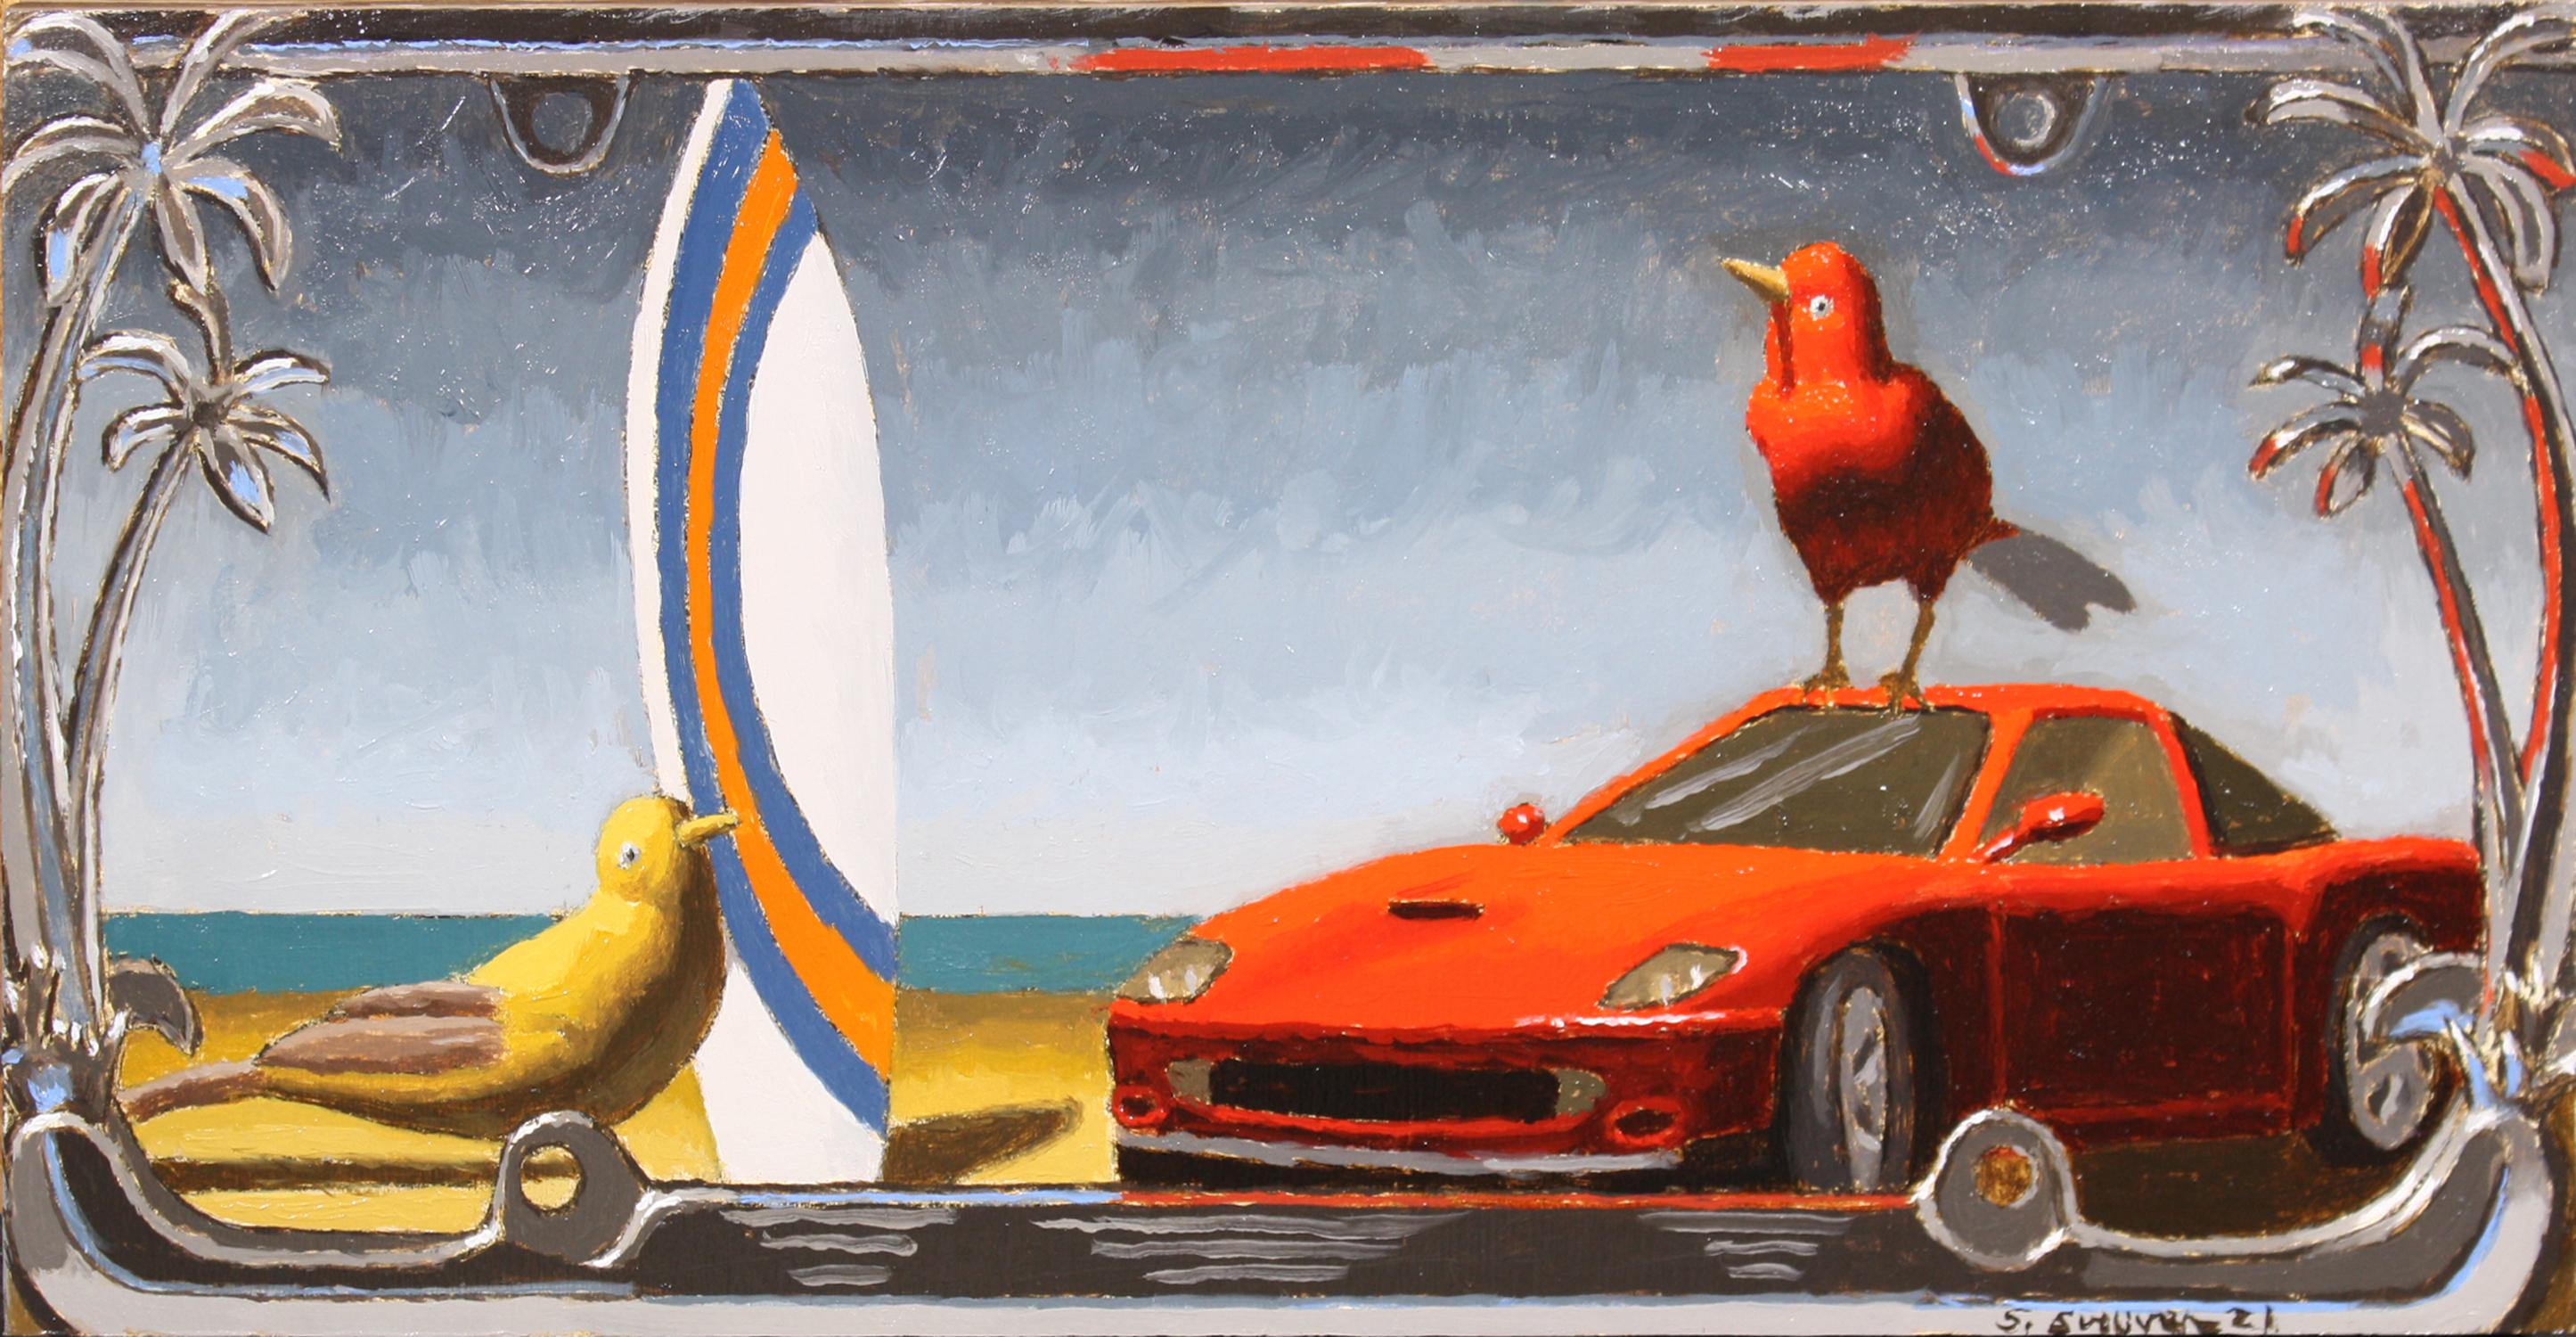 "Going to Cali" Oil Painting of Bird on Sports Car - Art by Shawn Sullivan